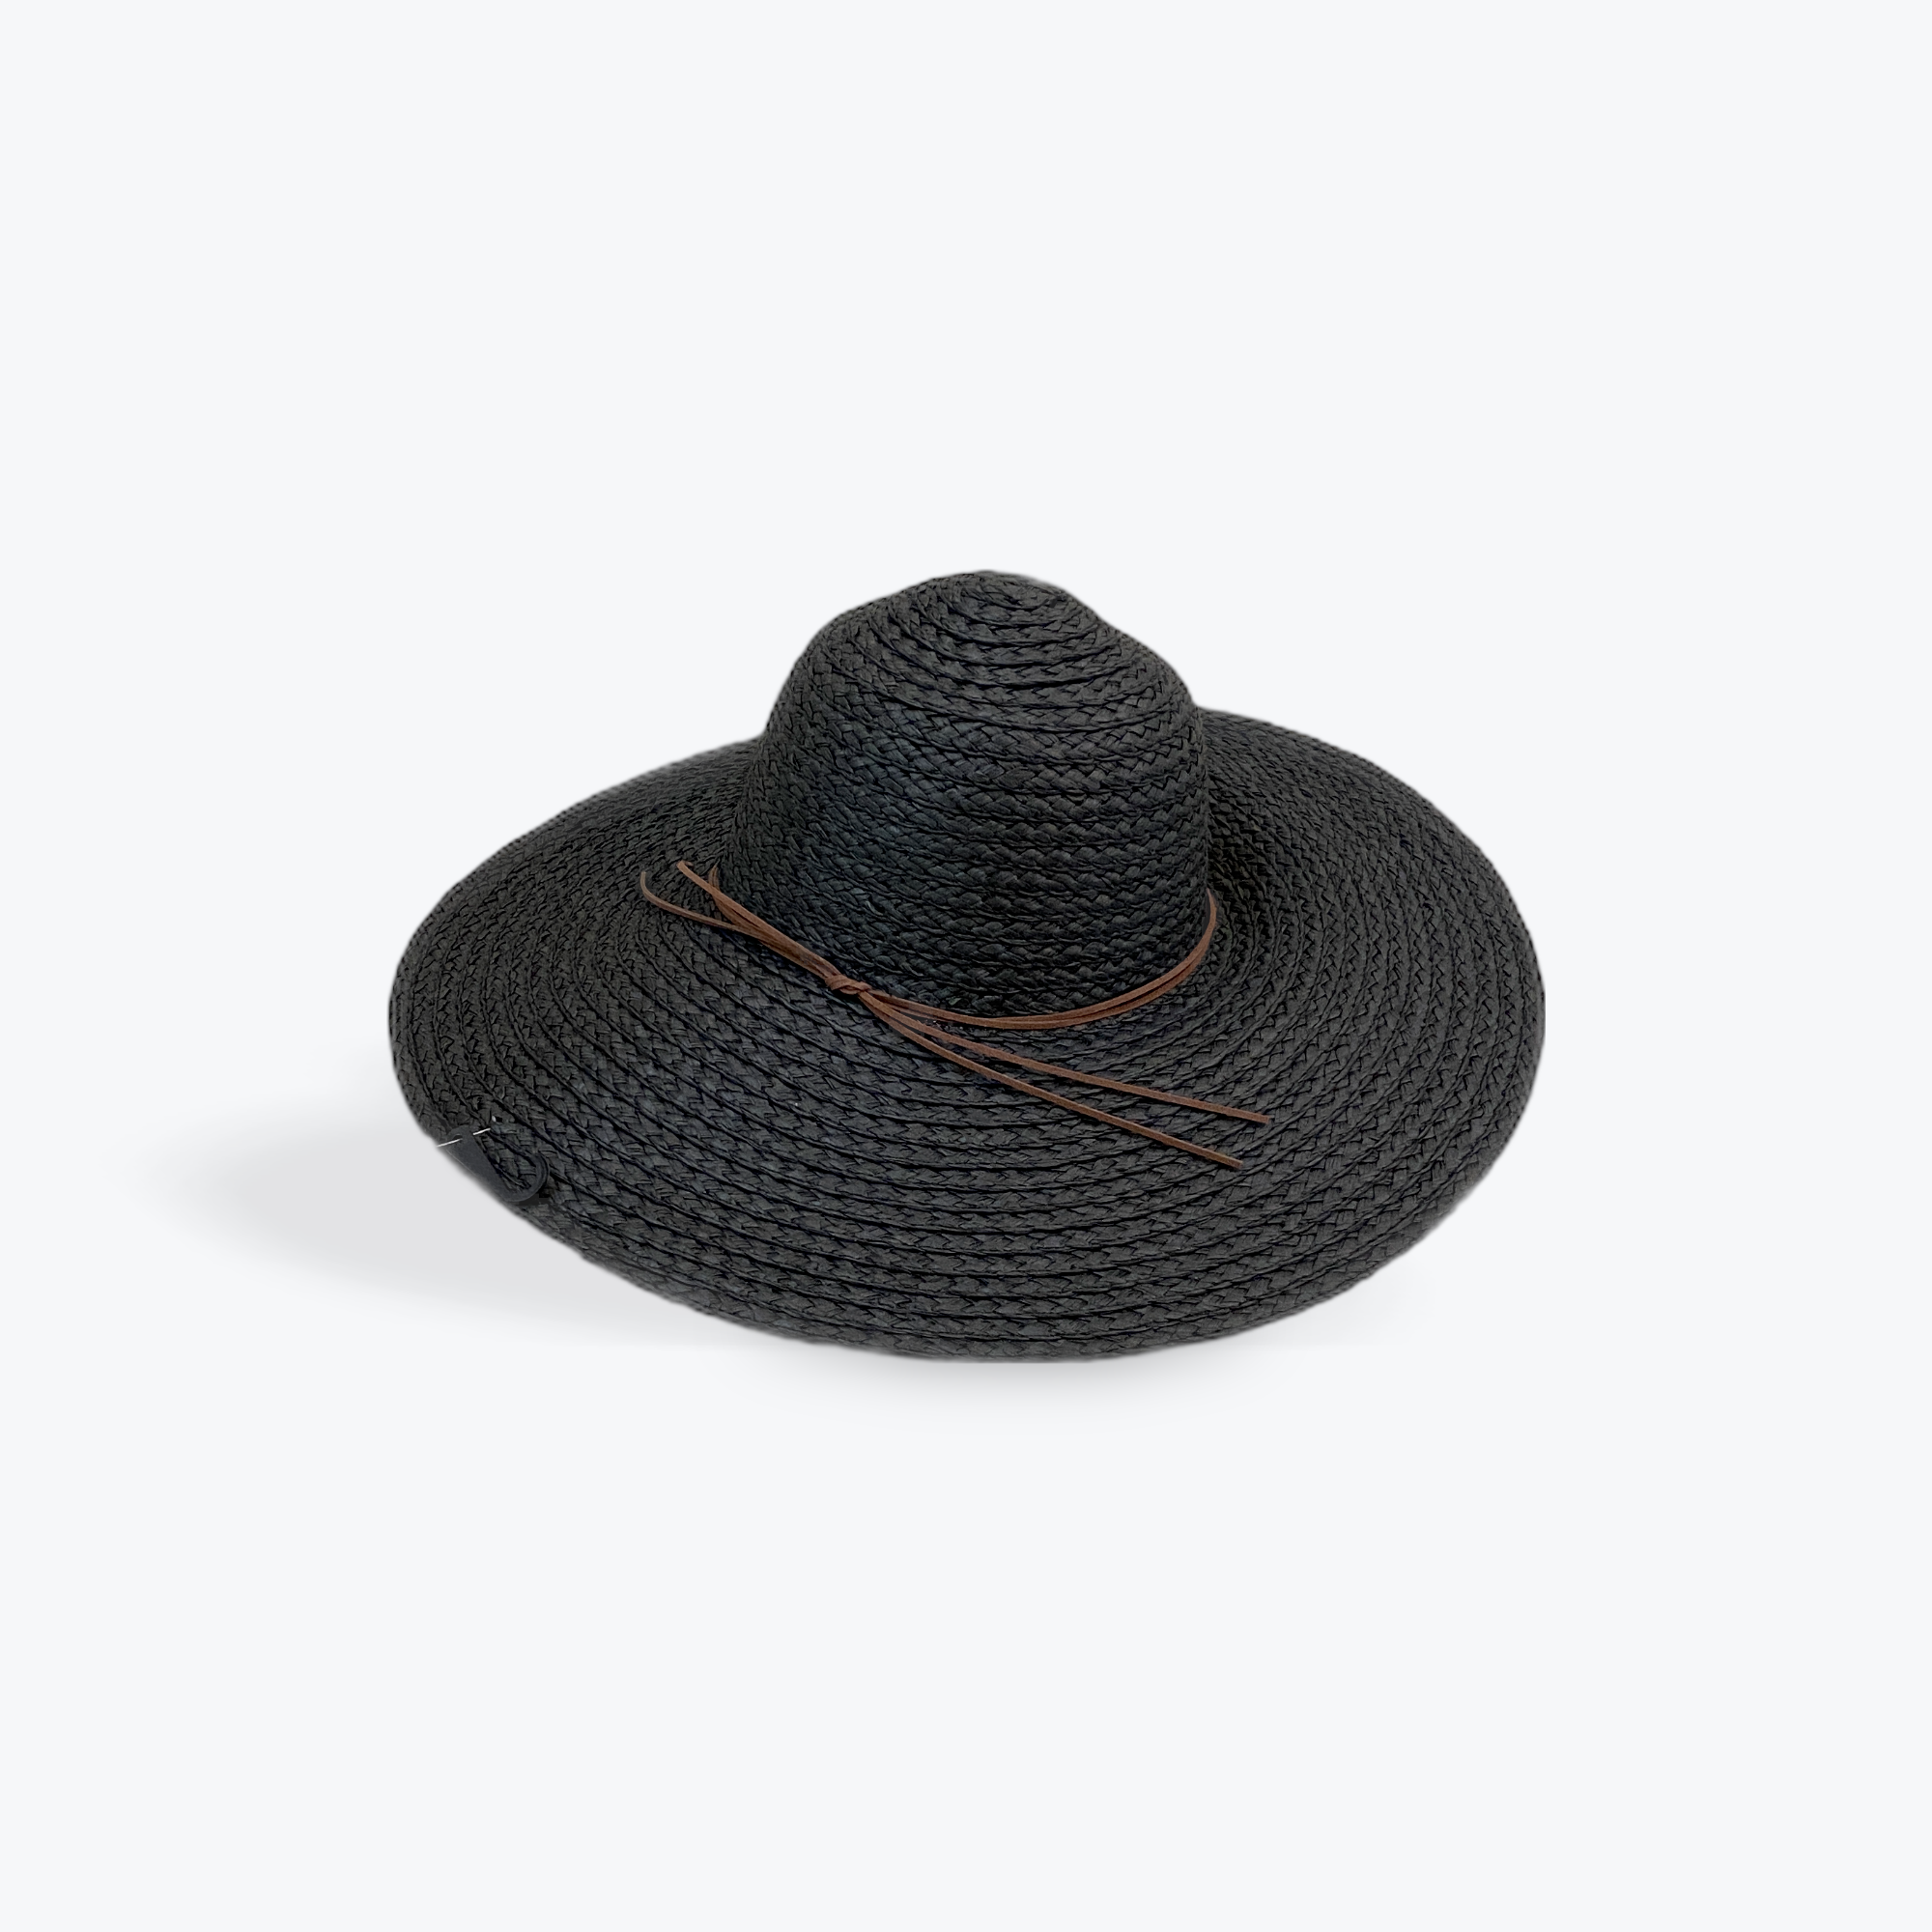 Black Wide Brim Hat with leather detail